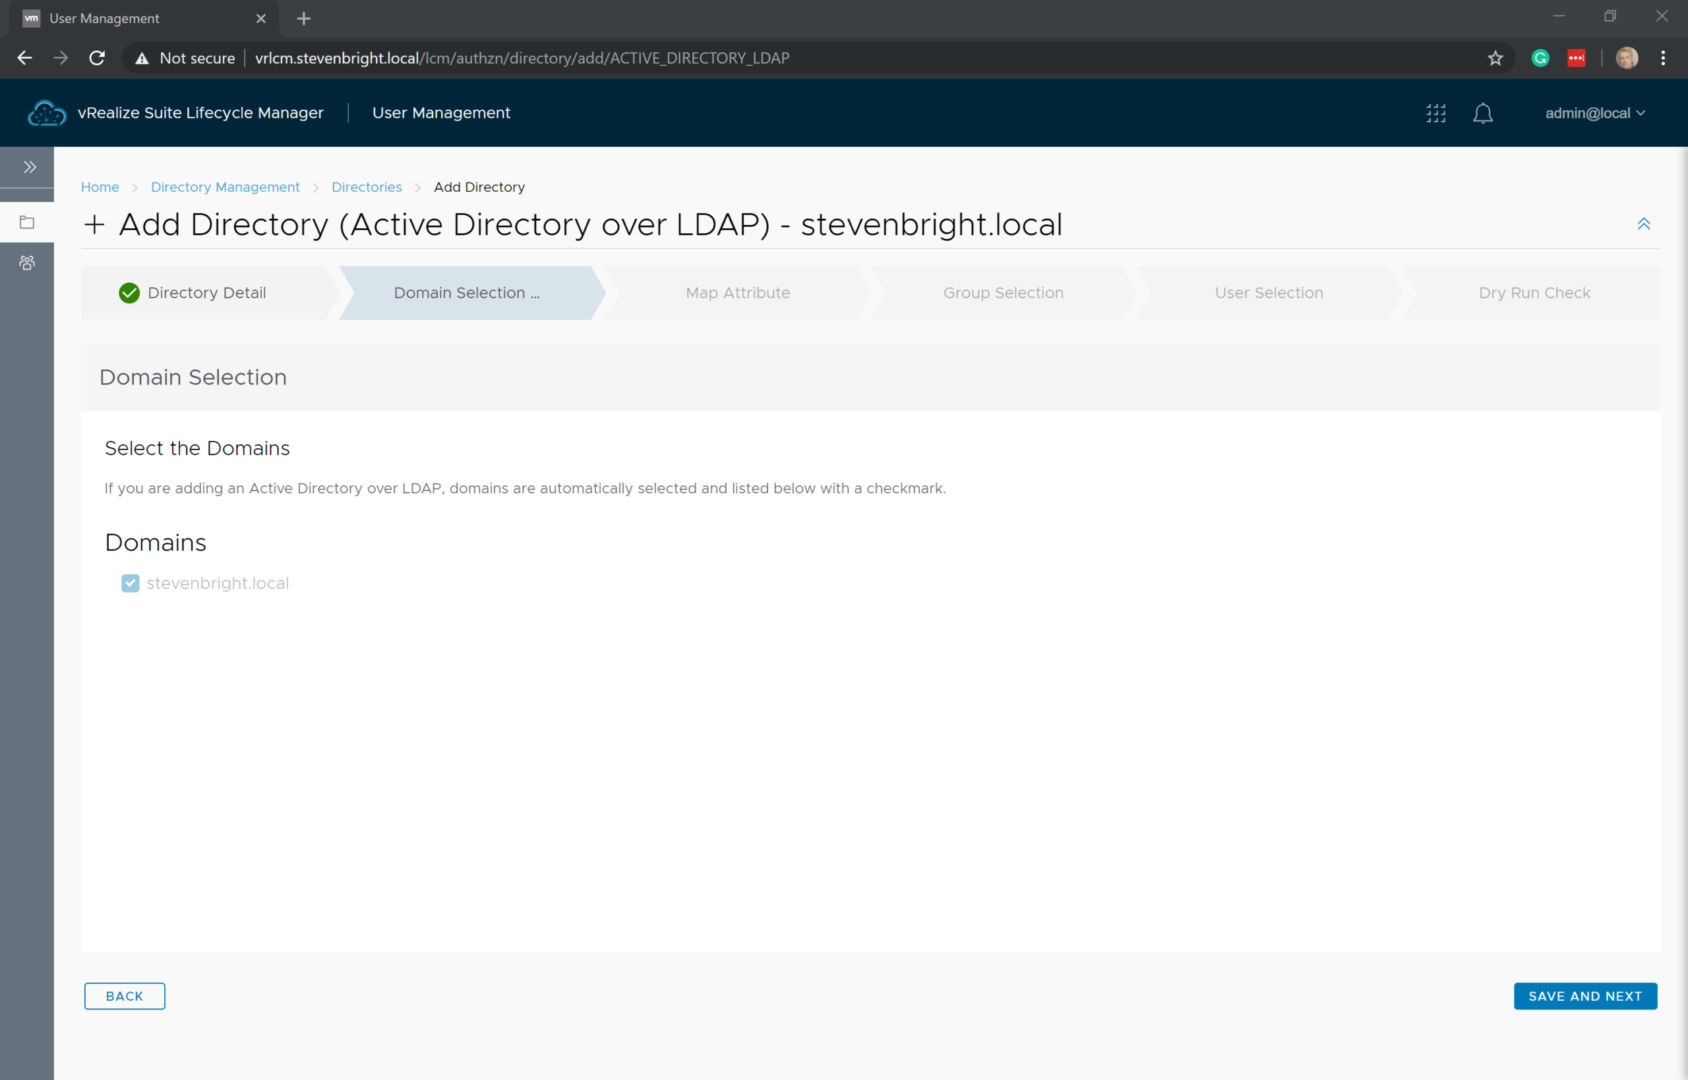 vRealize Suite Lifecycle Manager - User Management - Directory Management - Add Directory Wizard - Domain Selection